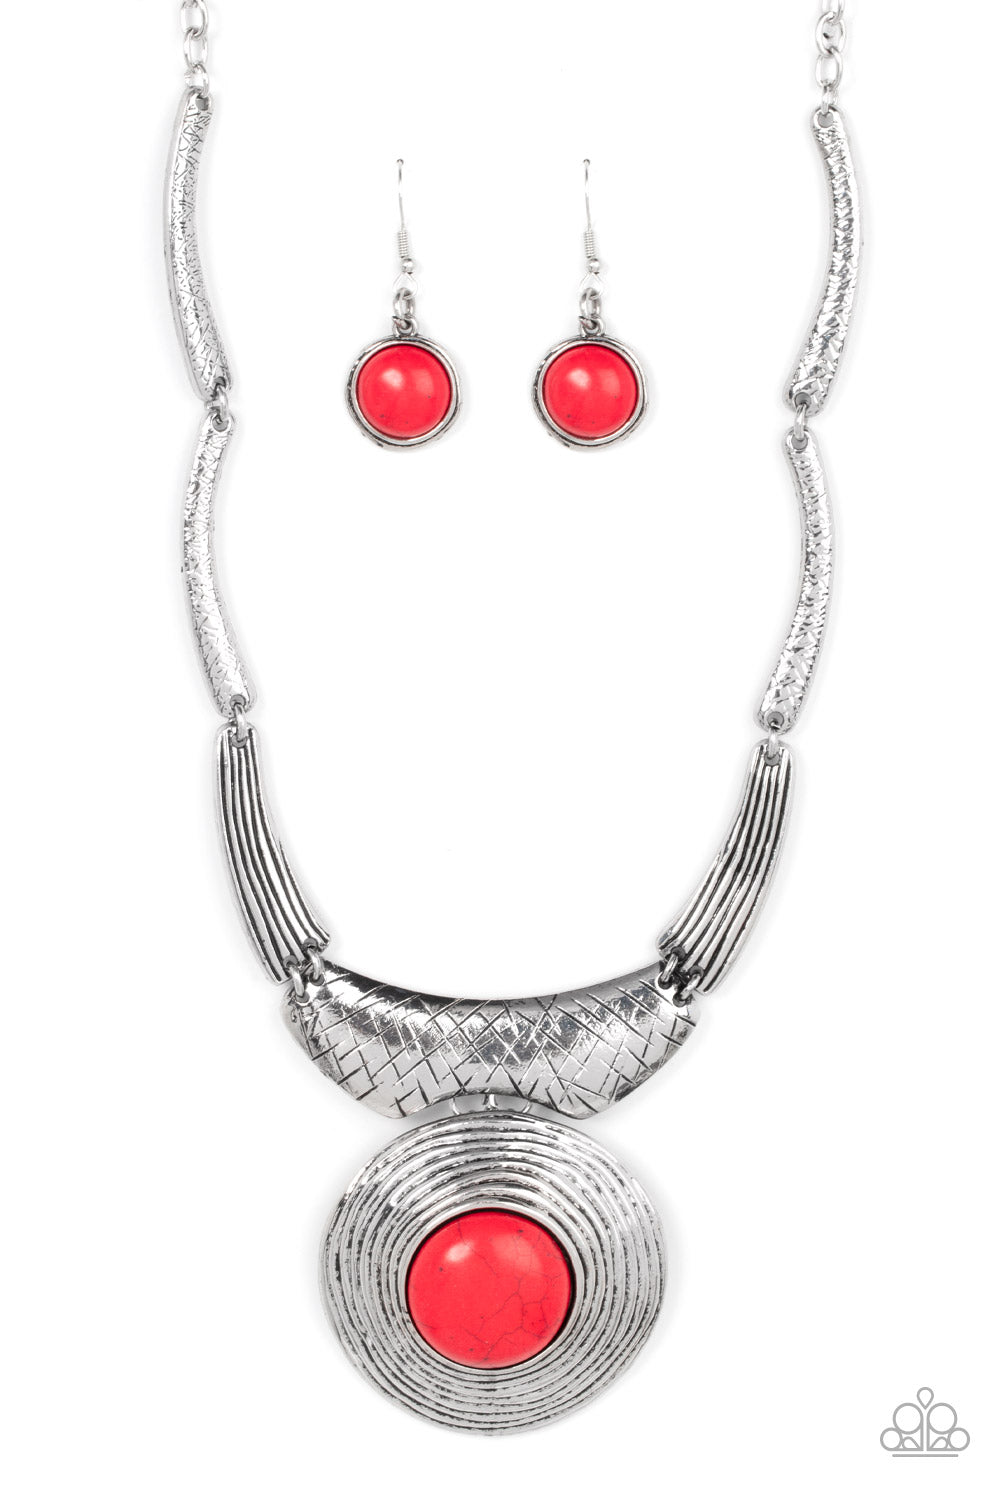 EMPRESS-ive Resume - red - Paparazzi necklace